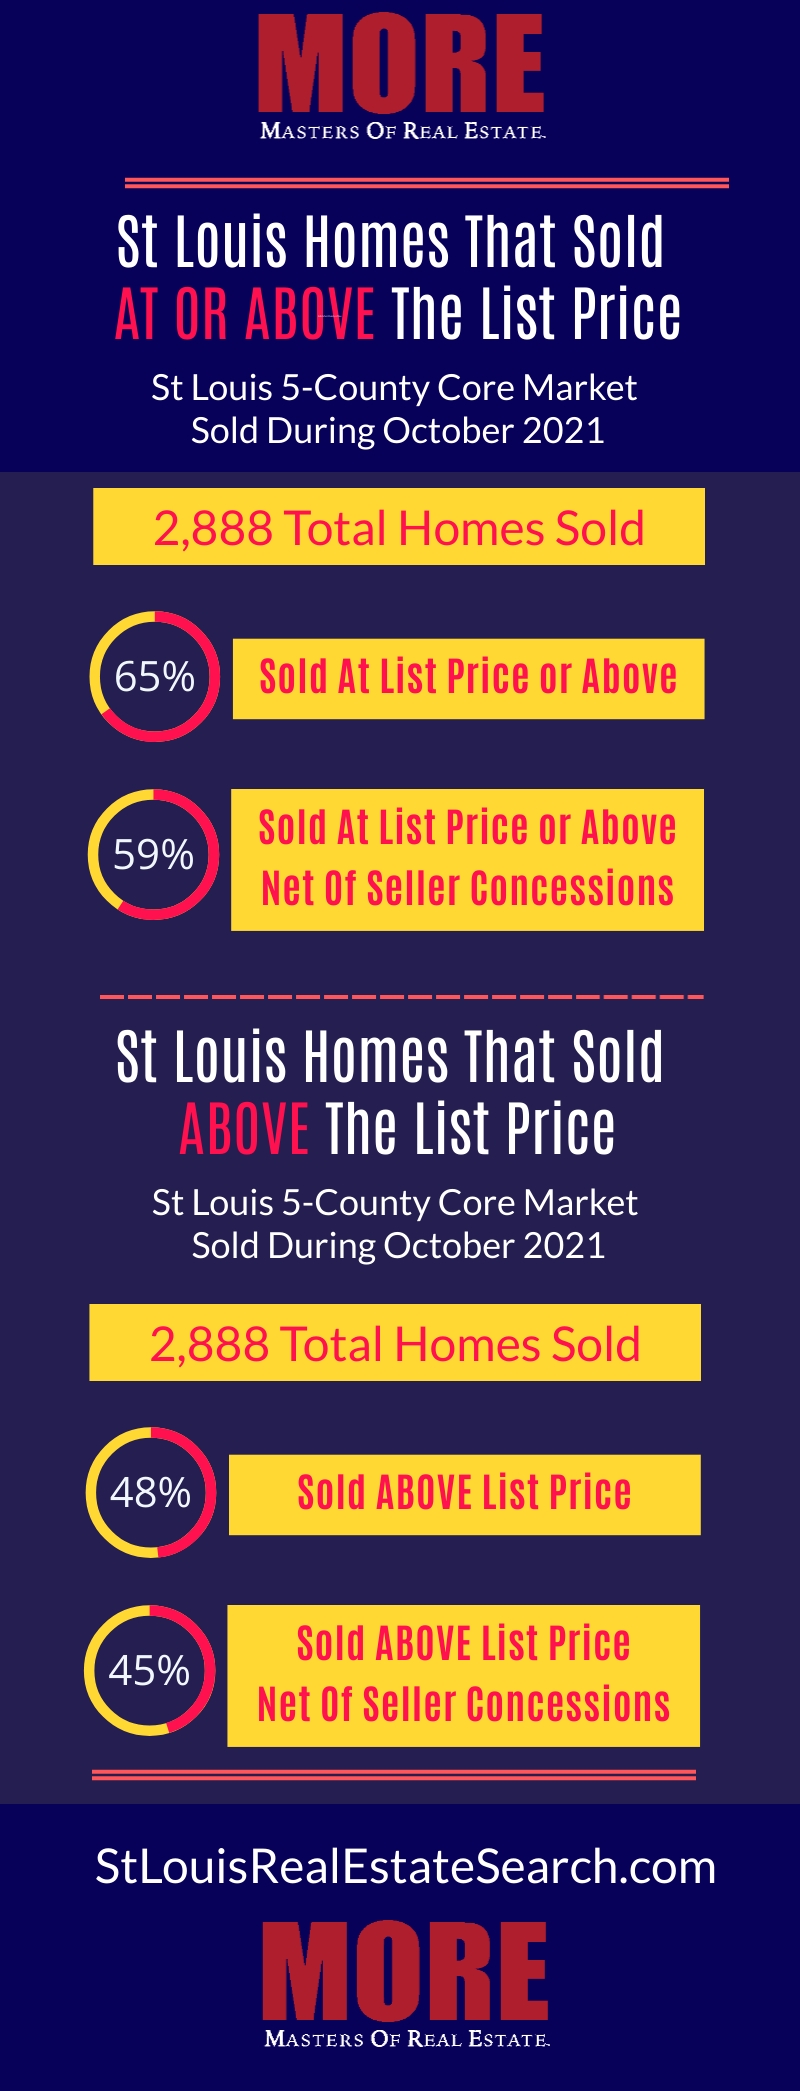 St Louis Homes that sold above full price - infographic